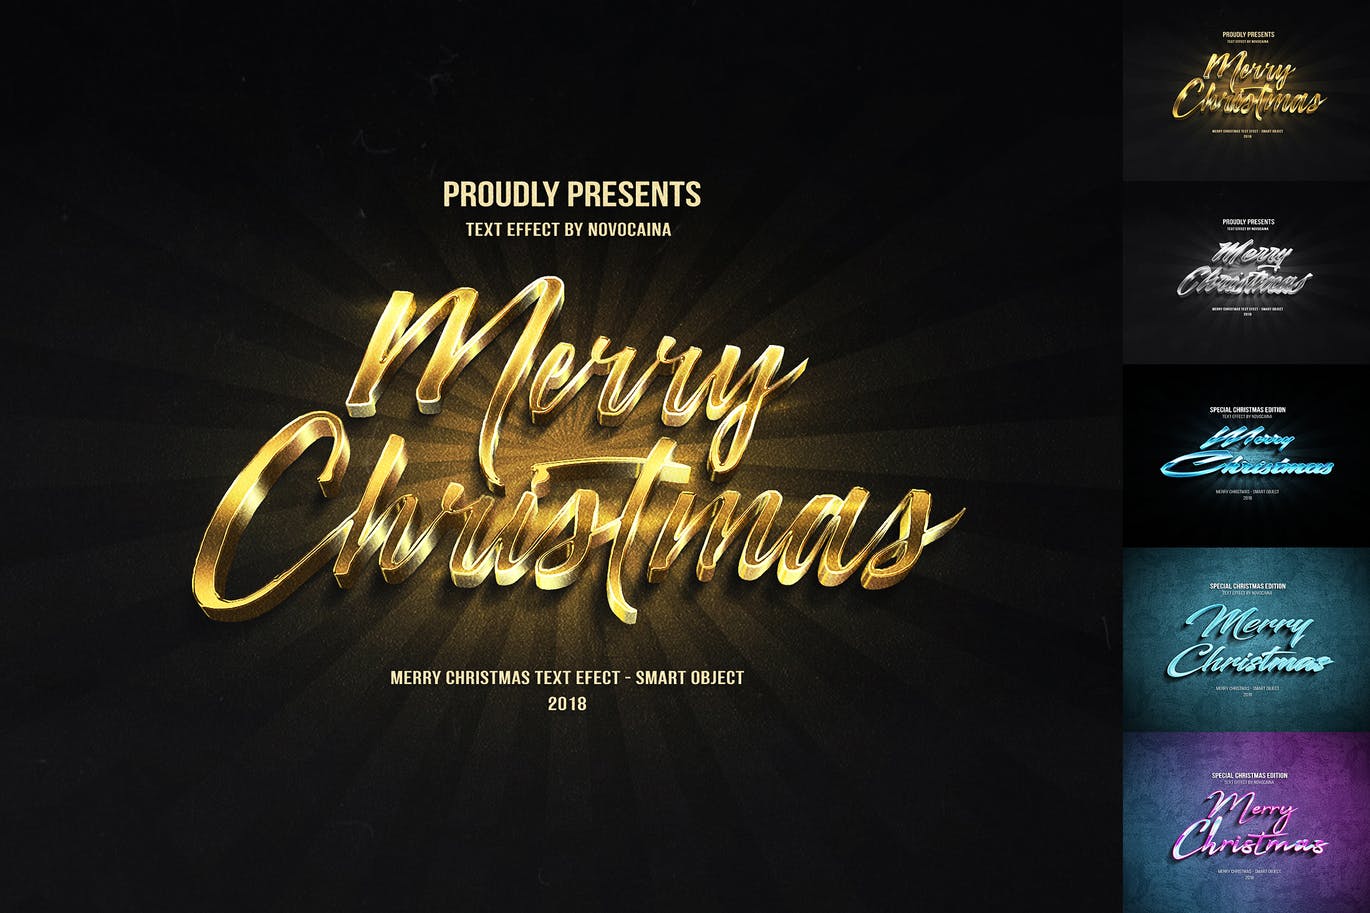 Glowing christmas text effects